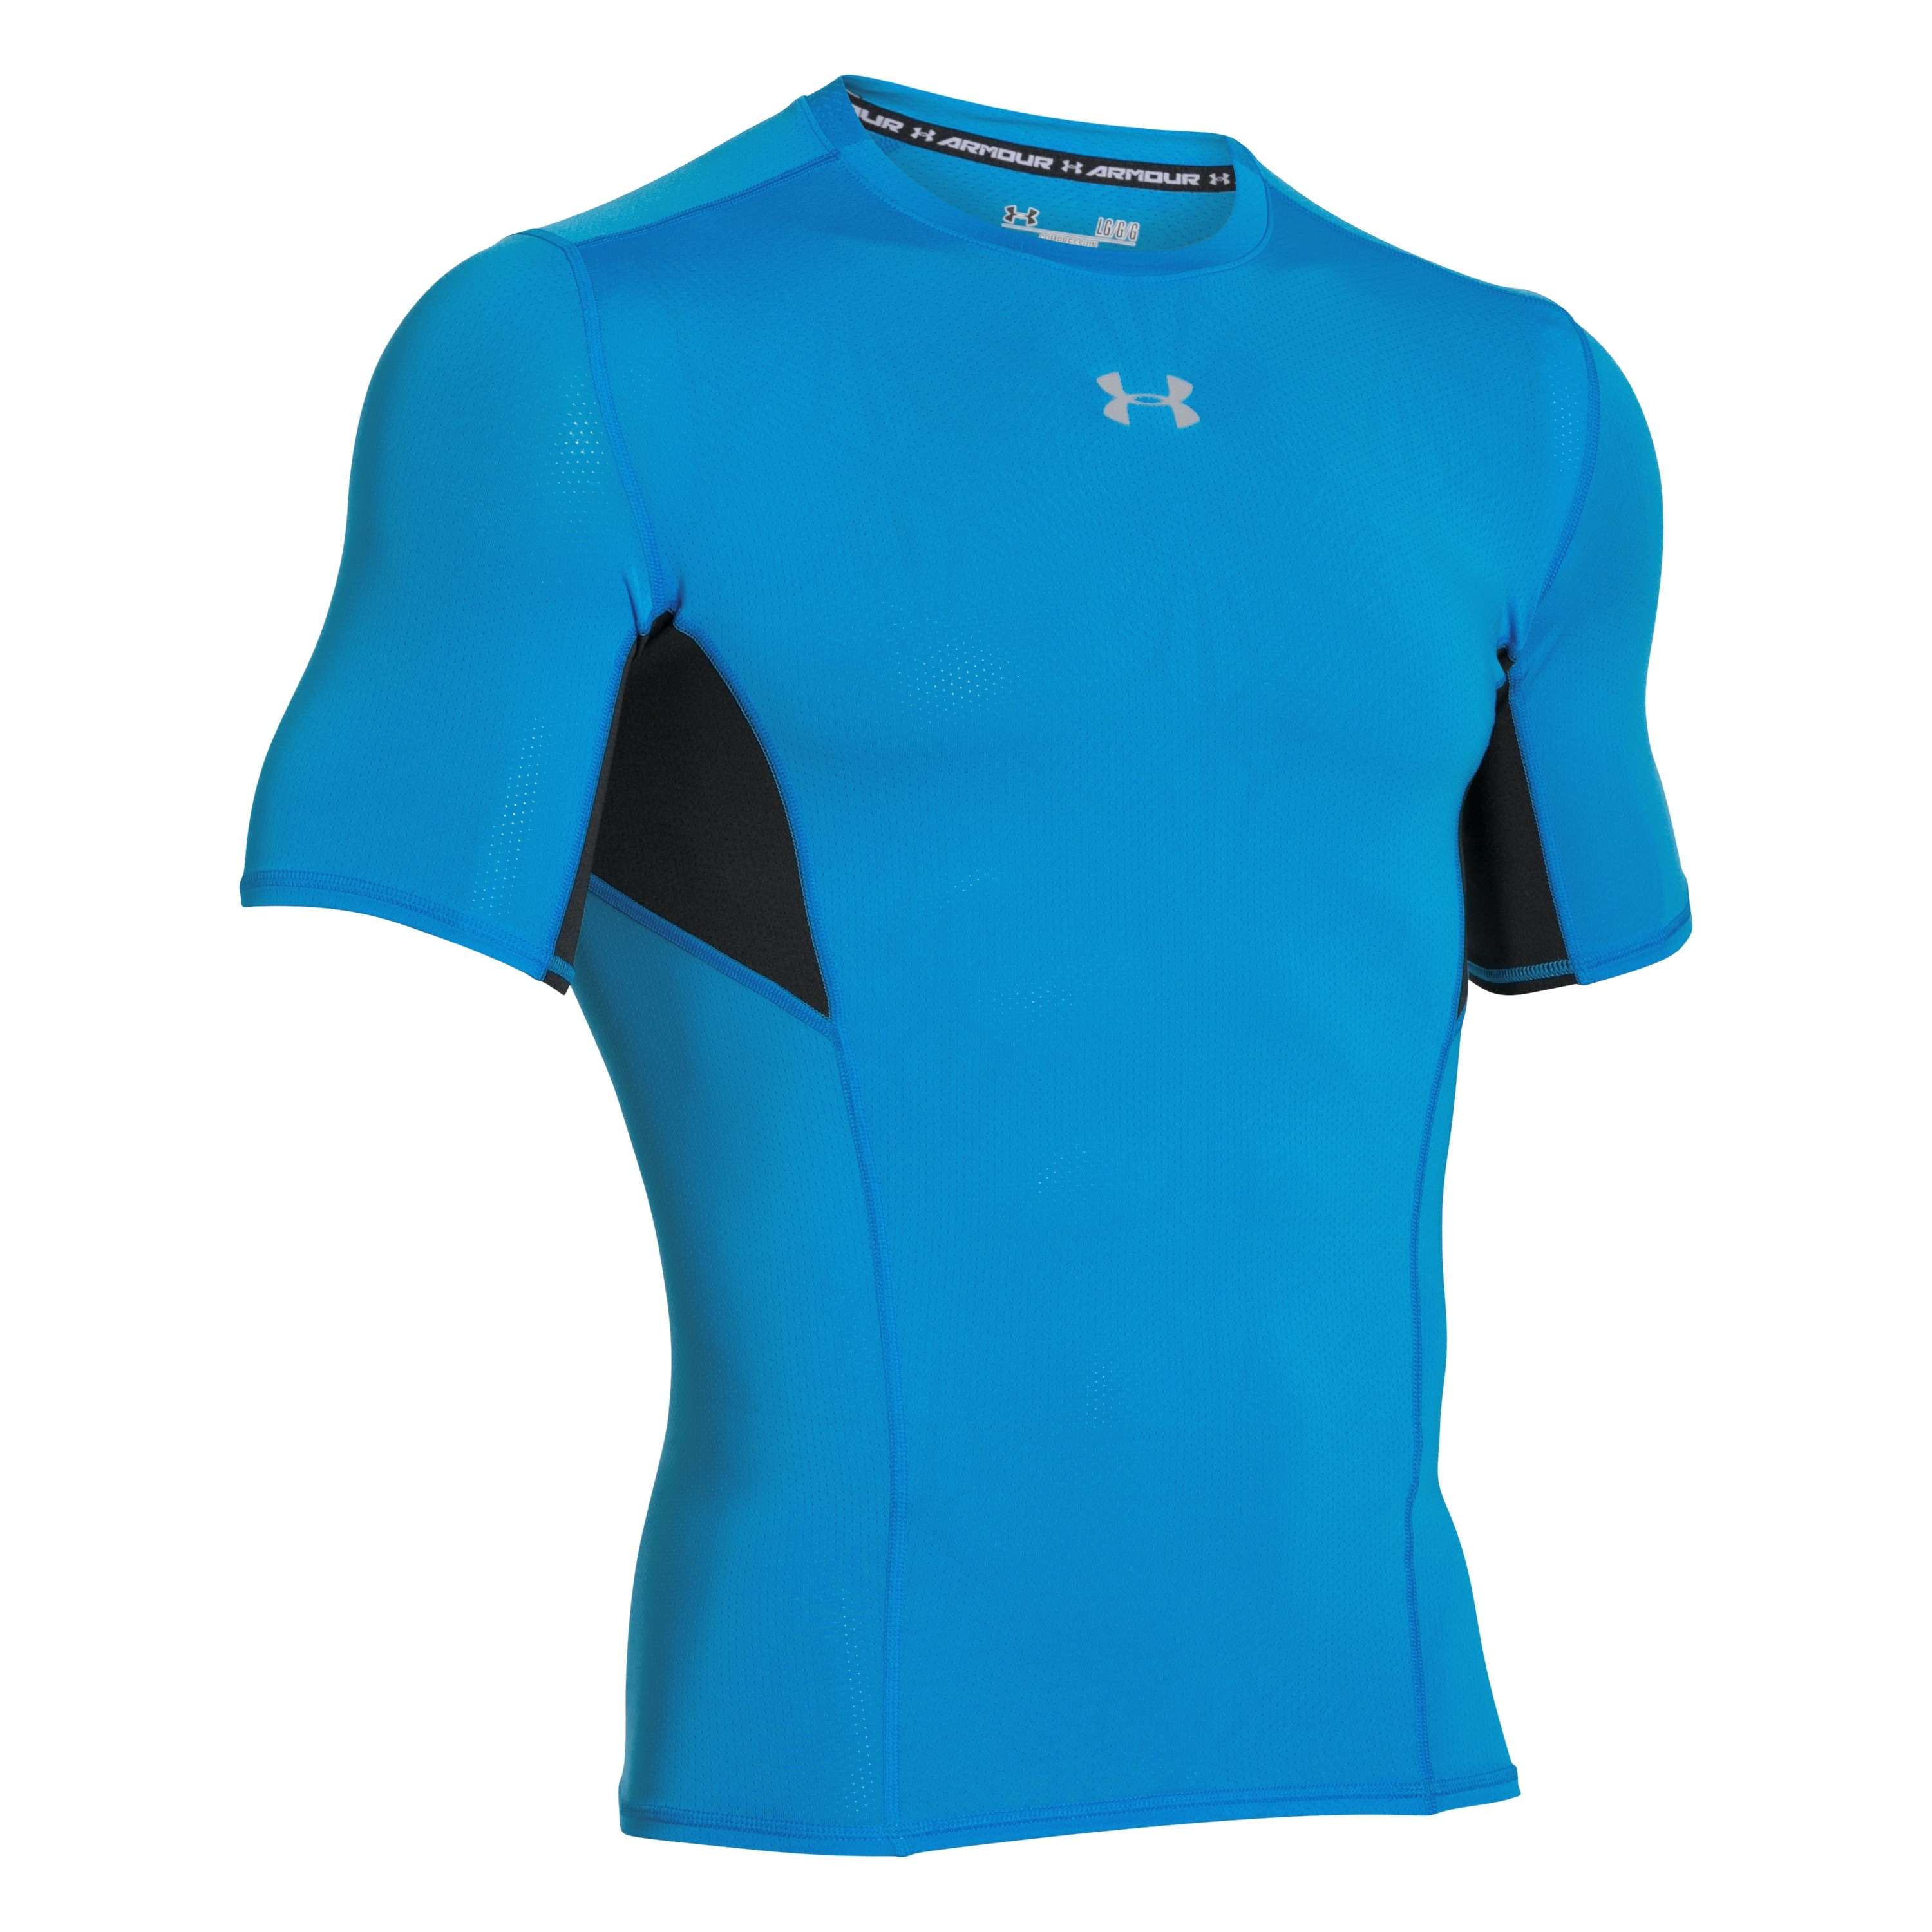 Under Armour Coolswitch Compression Shortsleeve Tee Black